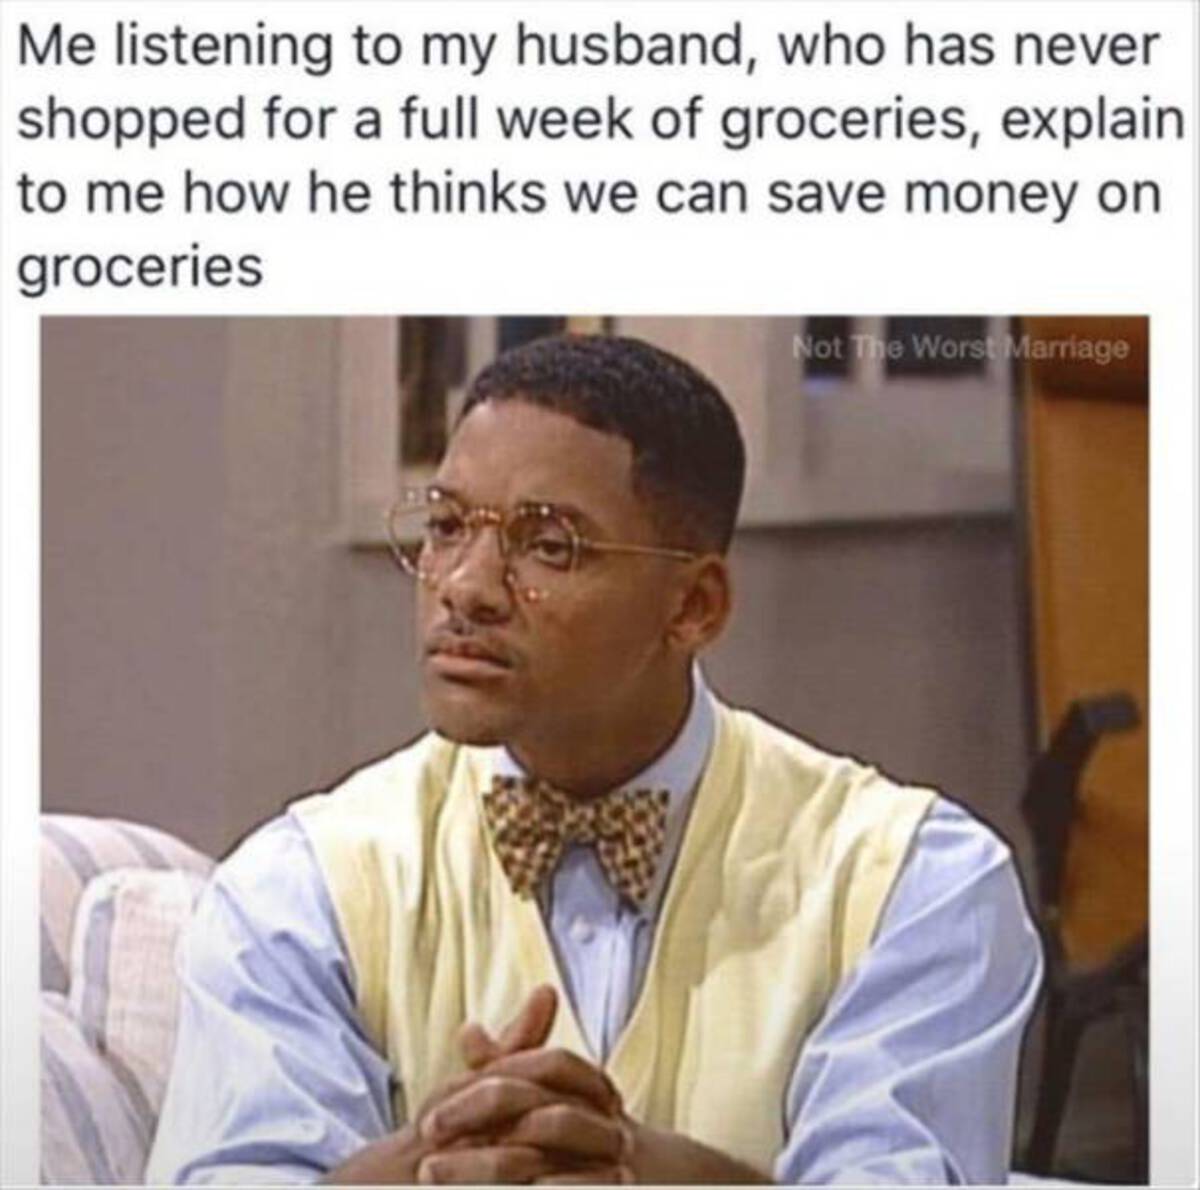 paying attention meme - Me listening to my husband, who has never shopped for a full week of groceries, explain to me how he thinks we can save money on groceries Not The Worst Marriage